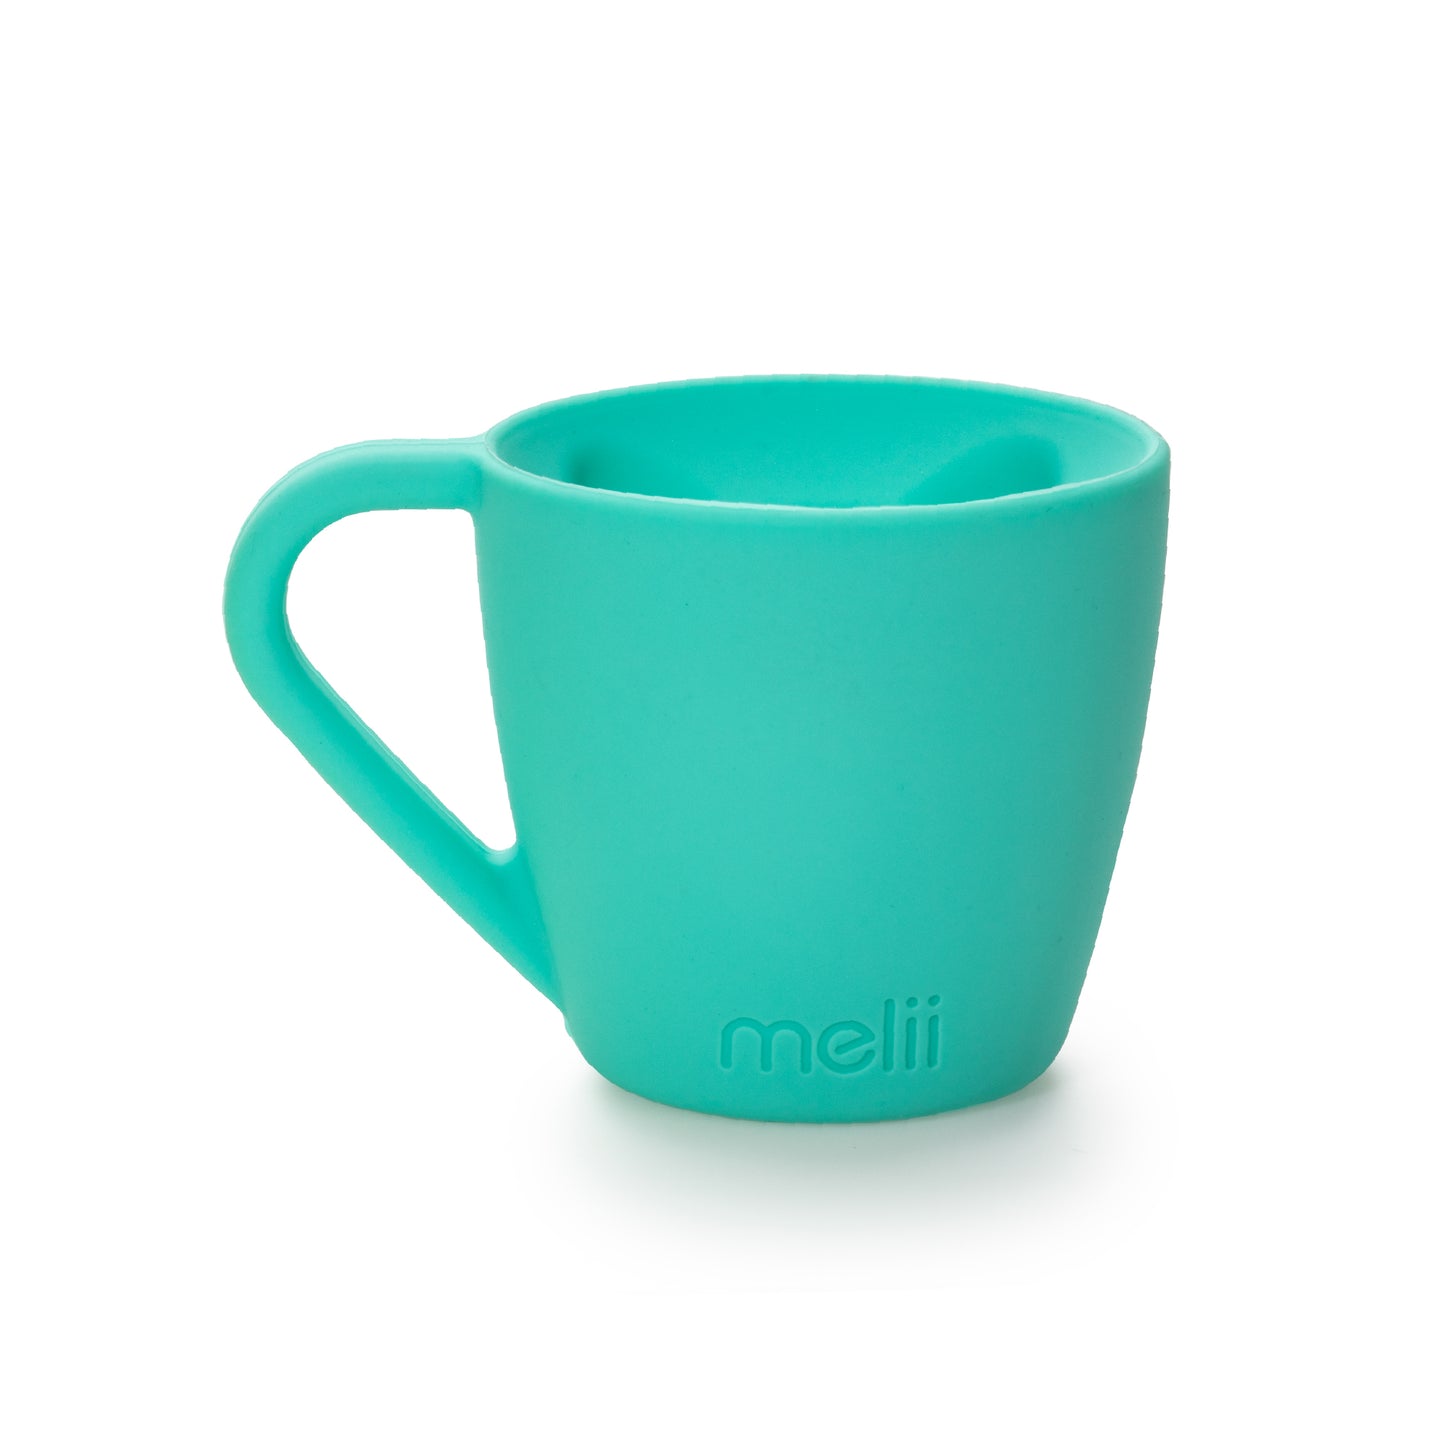 Melii Pretend Play Bear turquoise Mug for Kids - Imaginative Silicone Cup with Magical Bear-Shaped Beverage, Perfect for Hot and Cold Drinks - Durable, BPA-Free